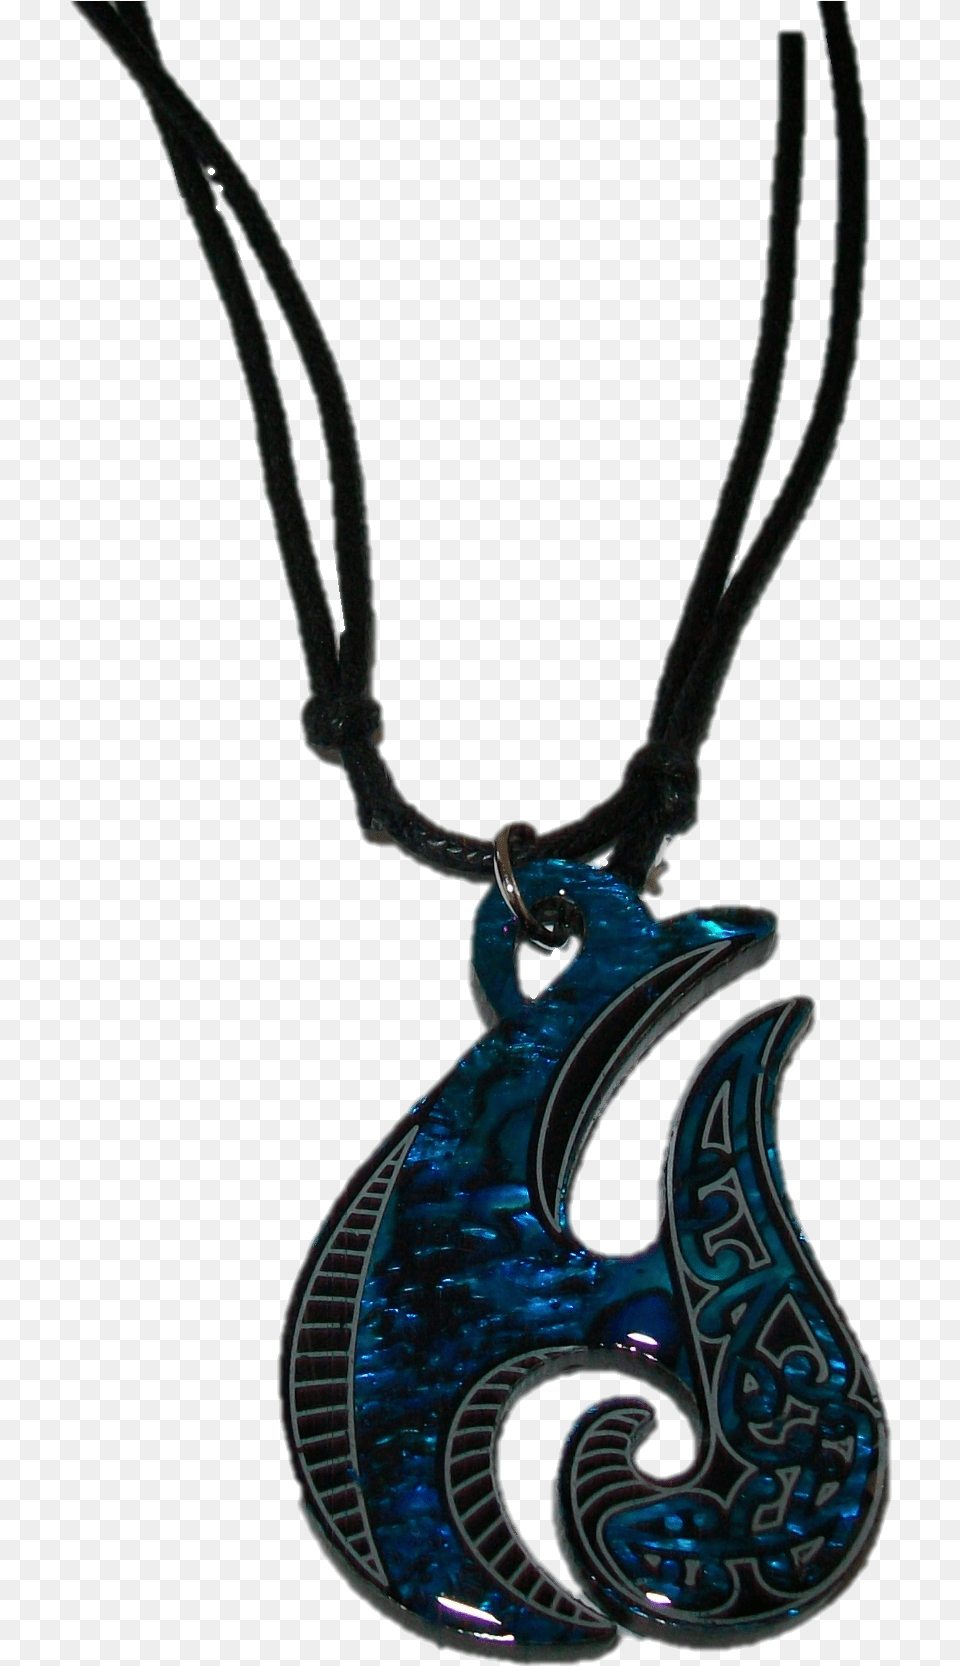 Paua Thong Necklace Locket, Accessories, Jewelry, Pendant, Gemstone Png